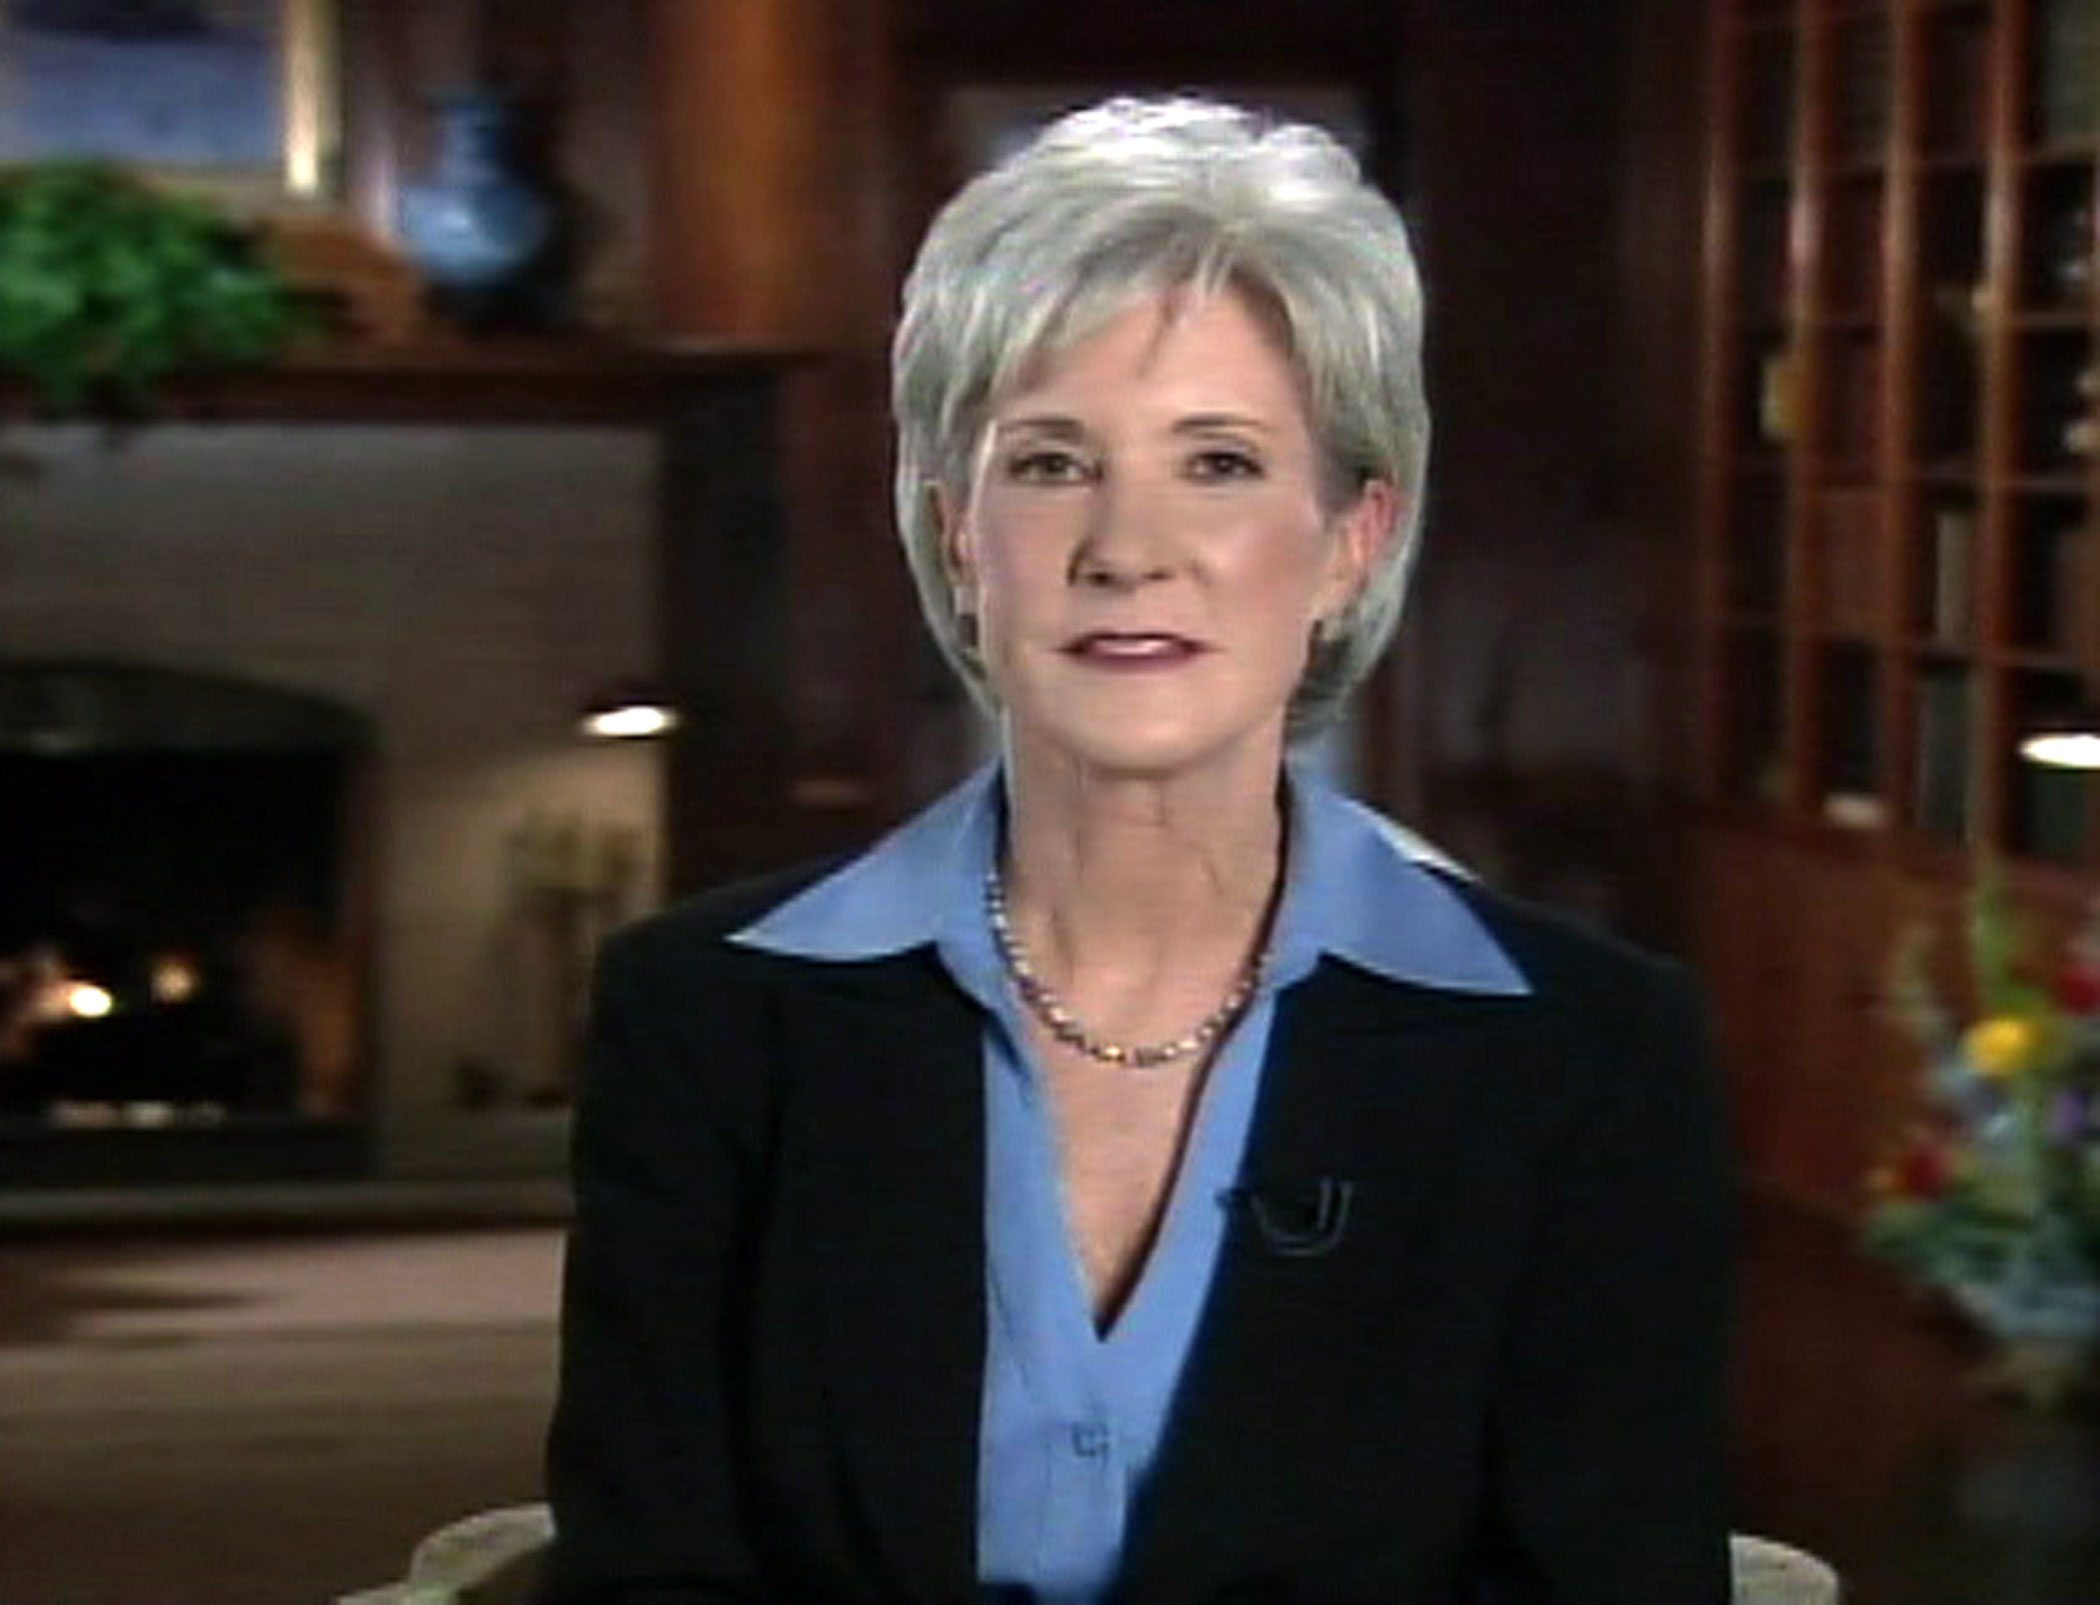 This still frame from television shows Kansas Gov. Kathleen Sebelius delivering the Democrat's response to the State of the Union address at Cedar Crest, the Kansas Governors' mansion, in Topeka, Kan., on Jan. 28, 2008.